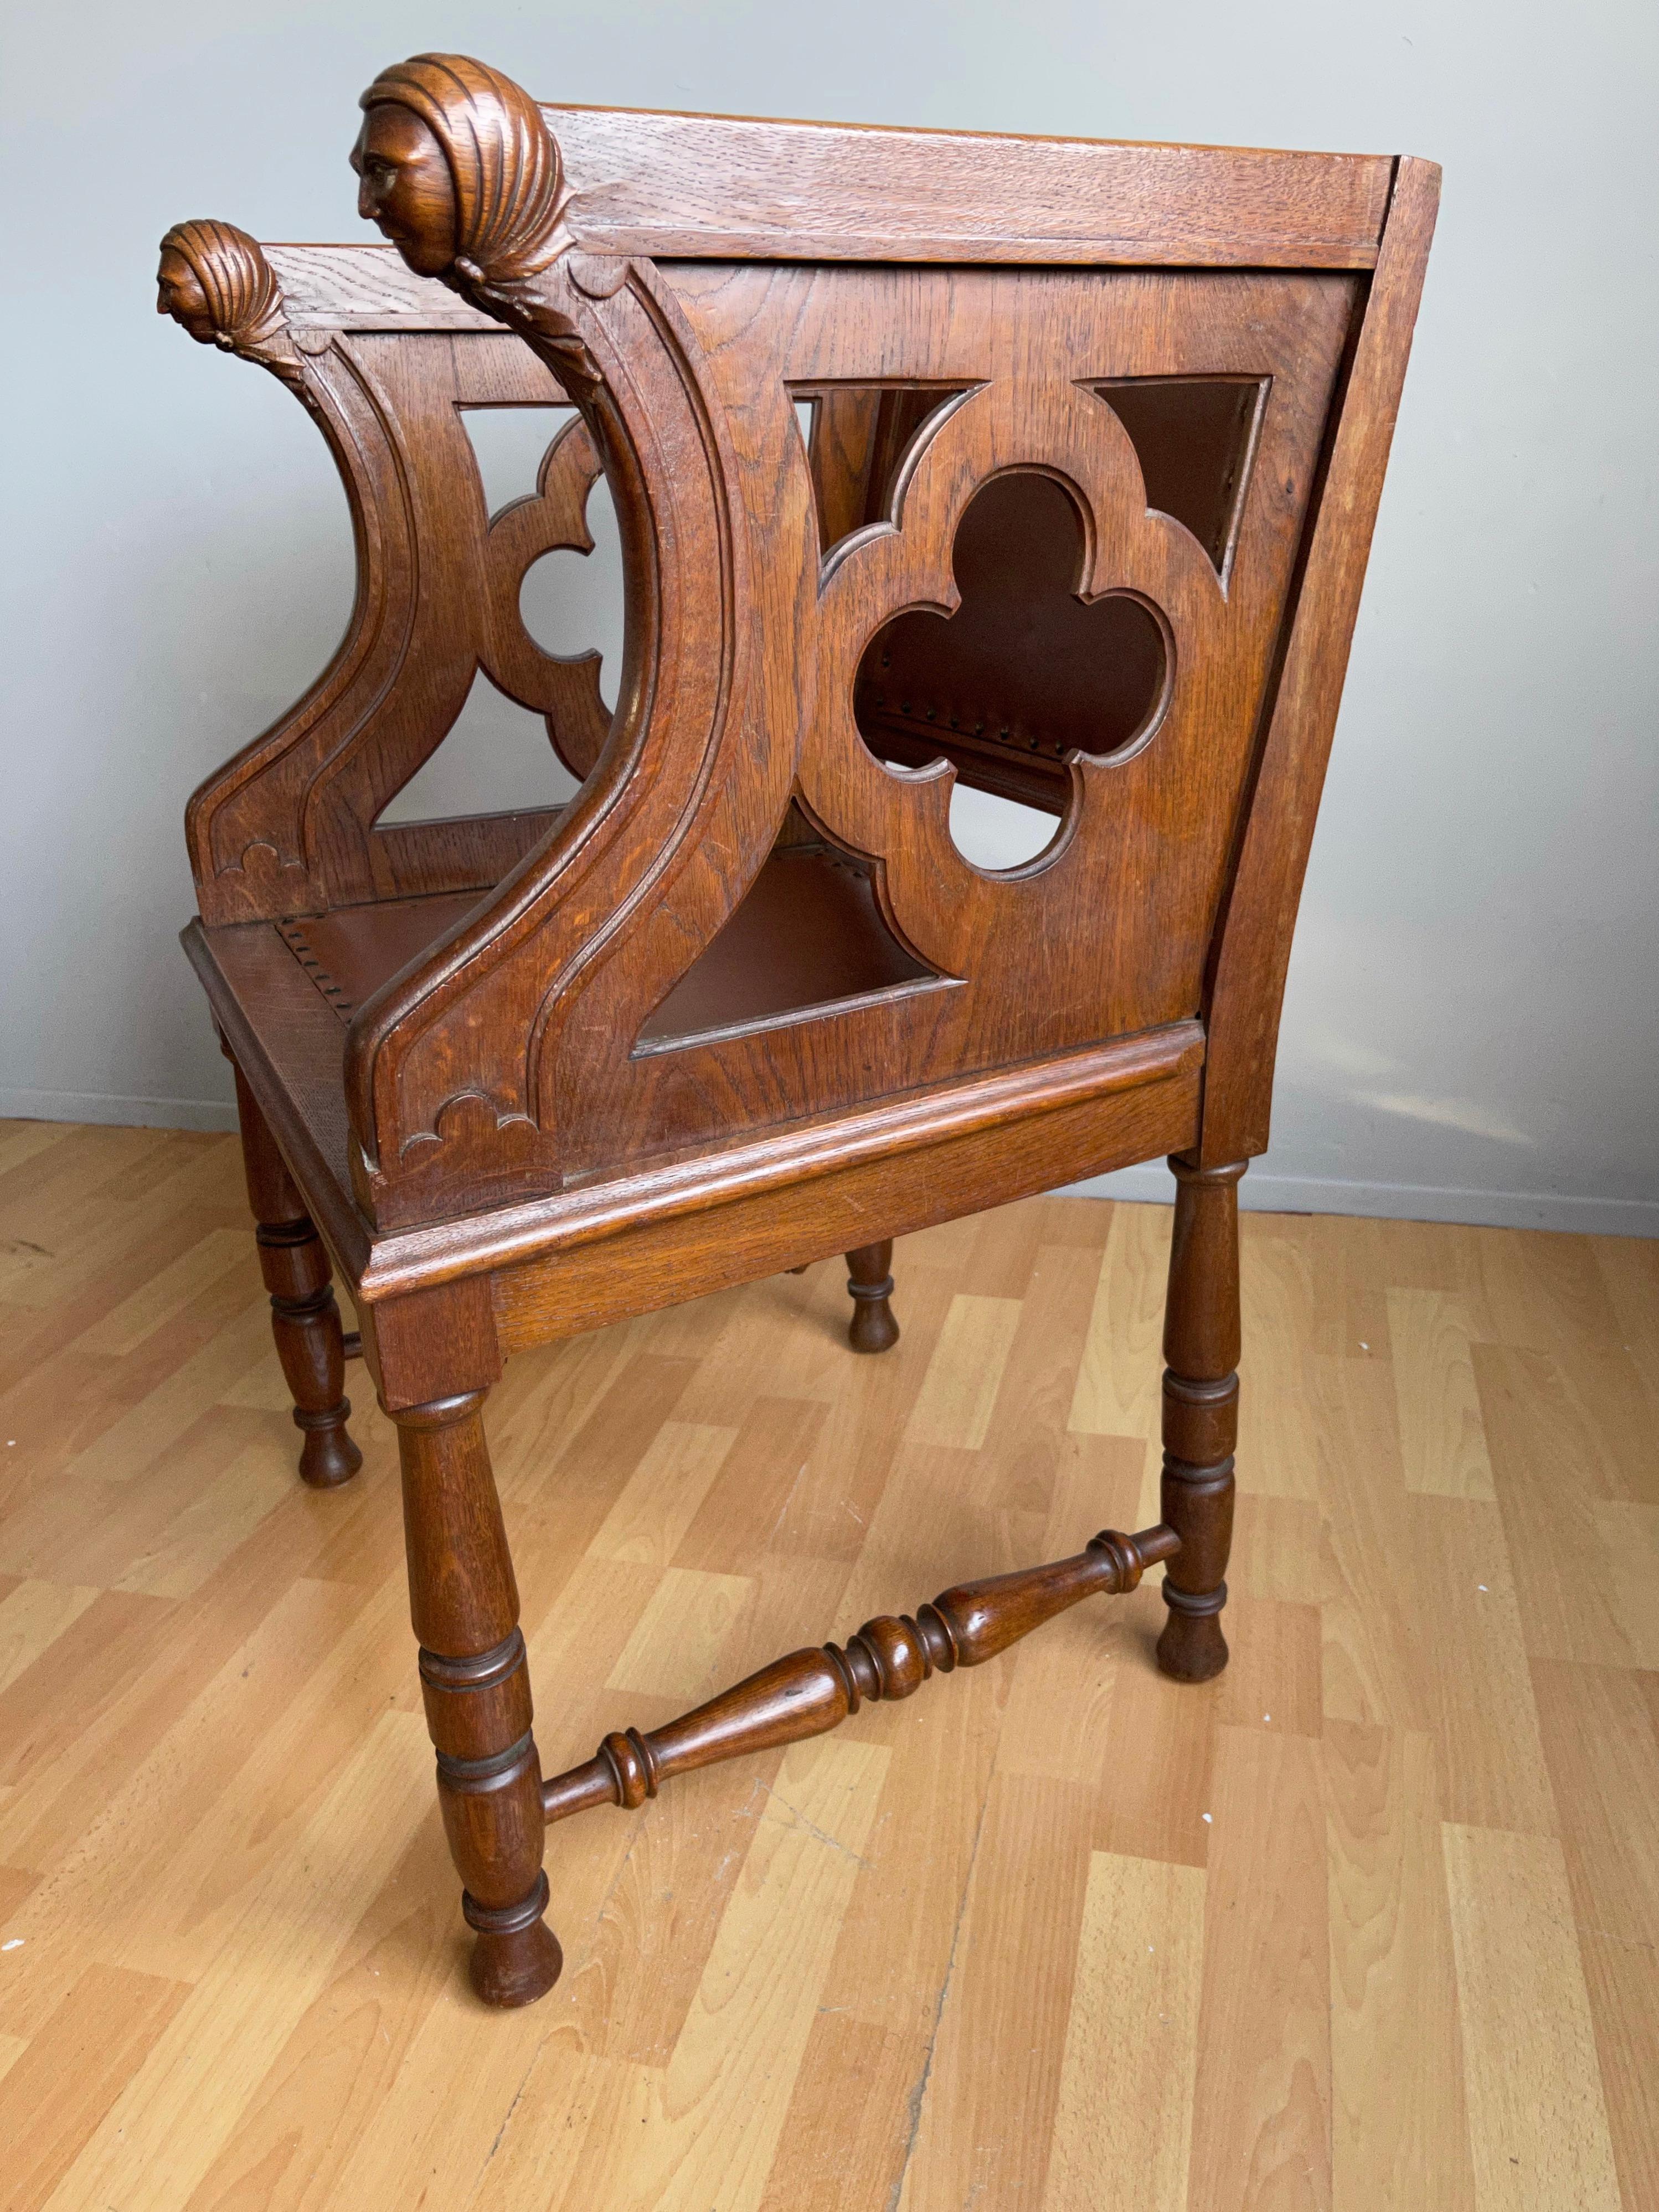 Rare Antique Gothic Revival Oak Armchair Chair w Female Sculptures in Armrests In Excellent Condition For Sale In Lisse, NL